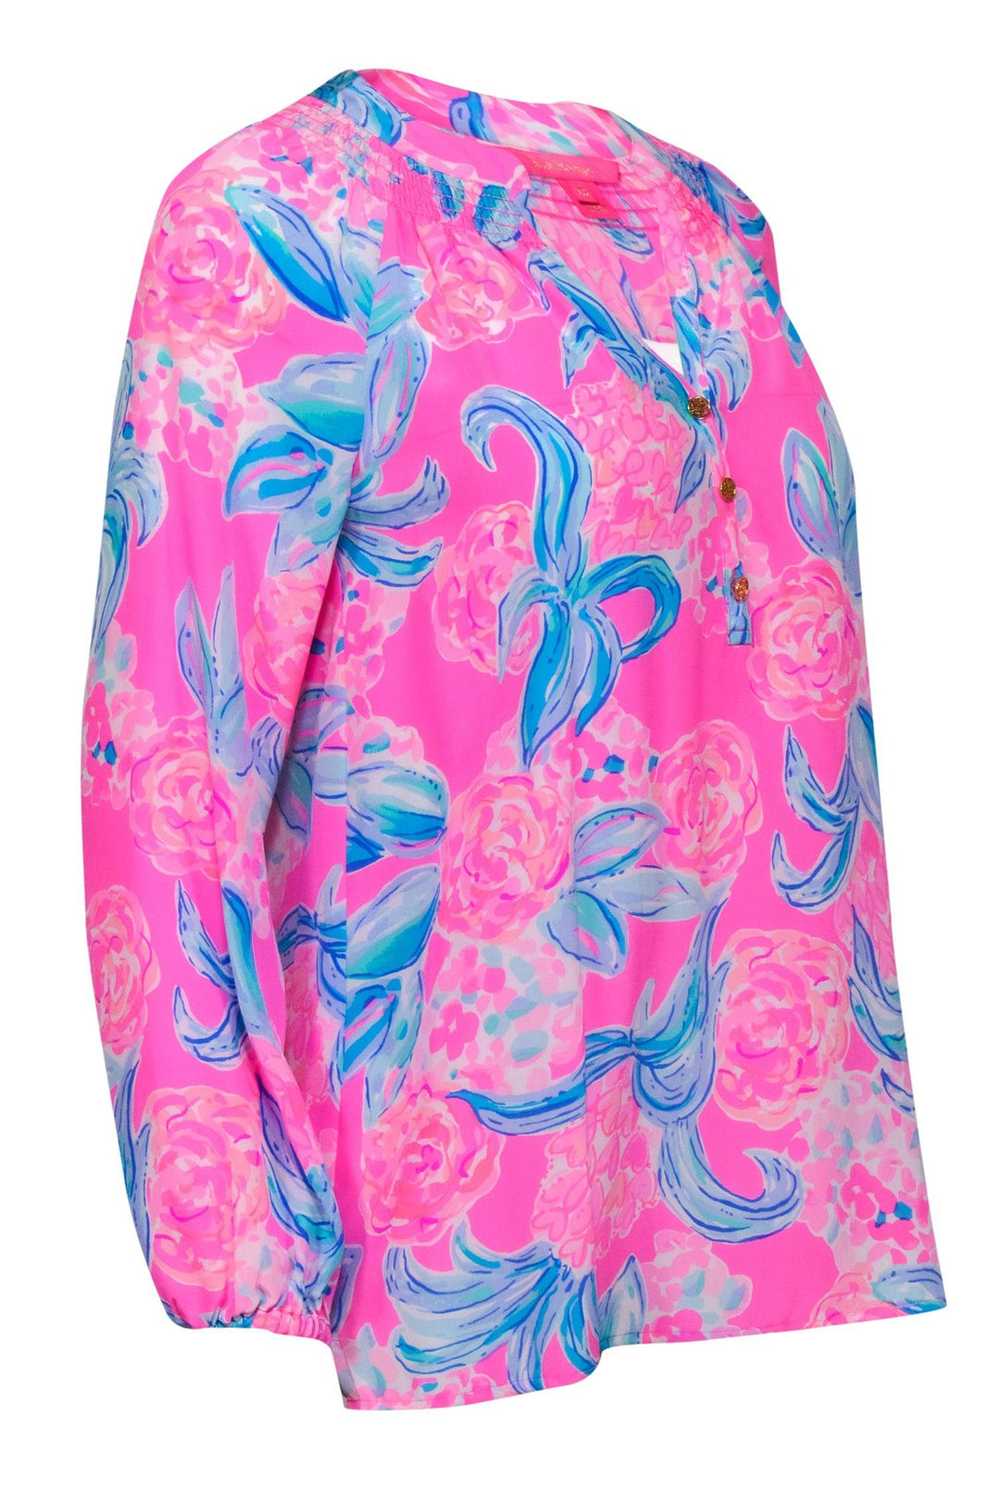 Lilly Pulitzer - Bright Pink & Blue Floral Silk P… - image 2